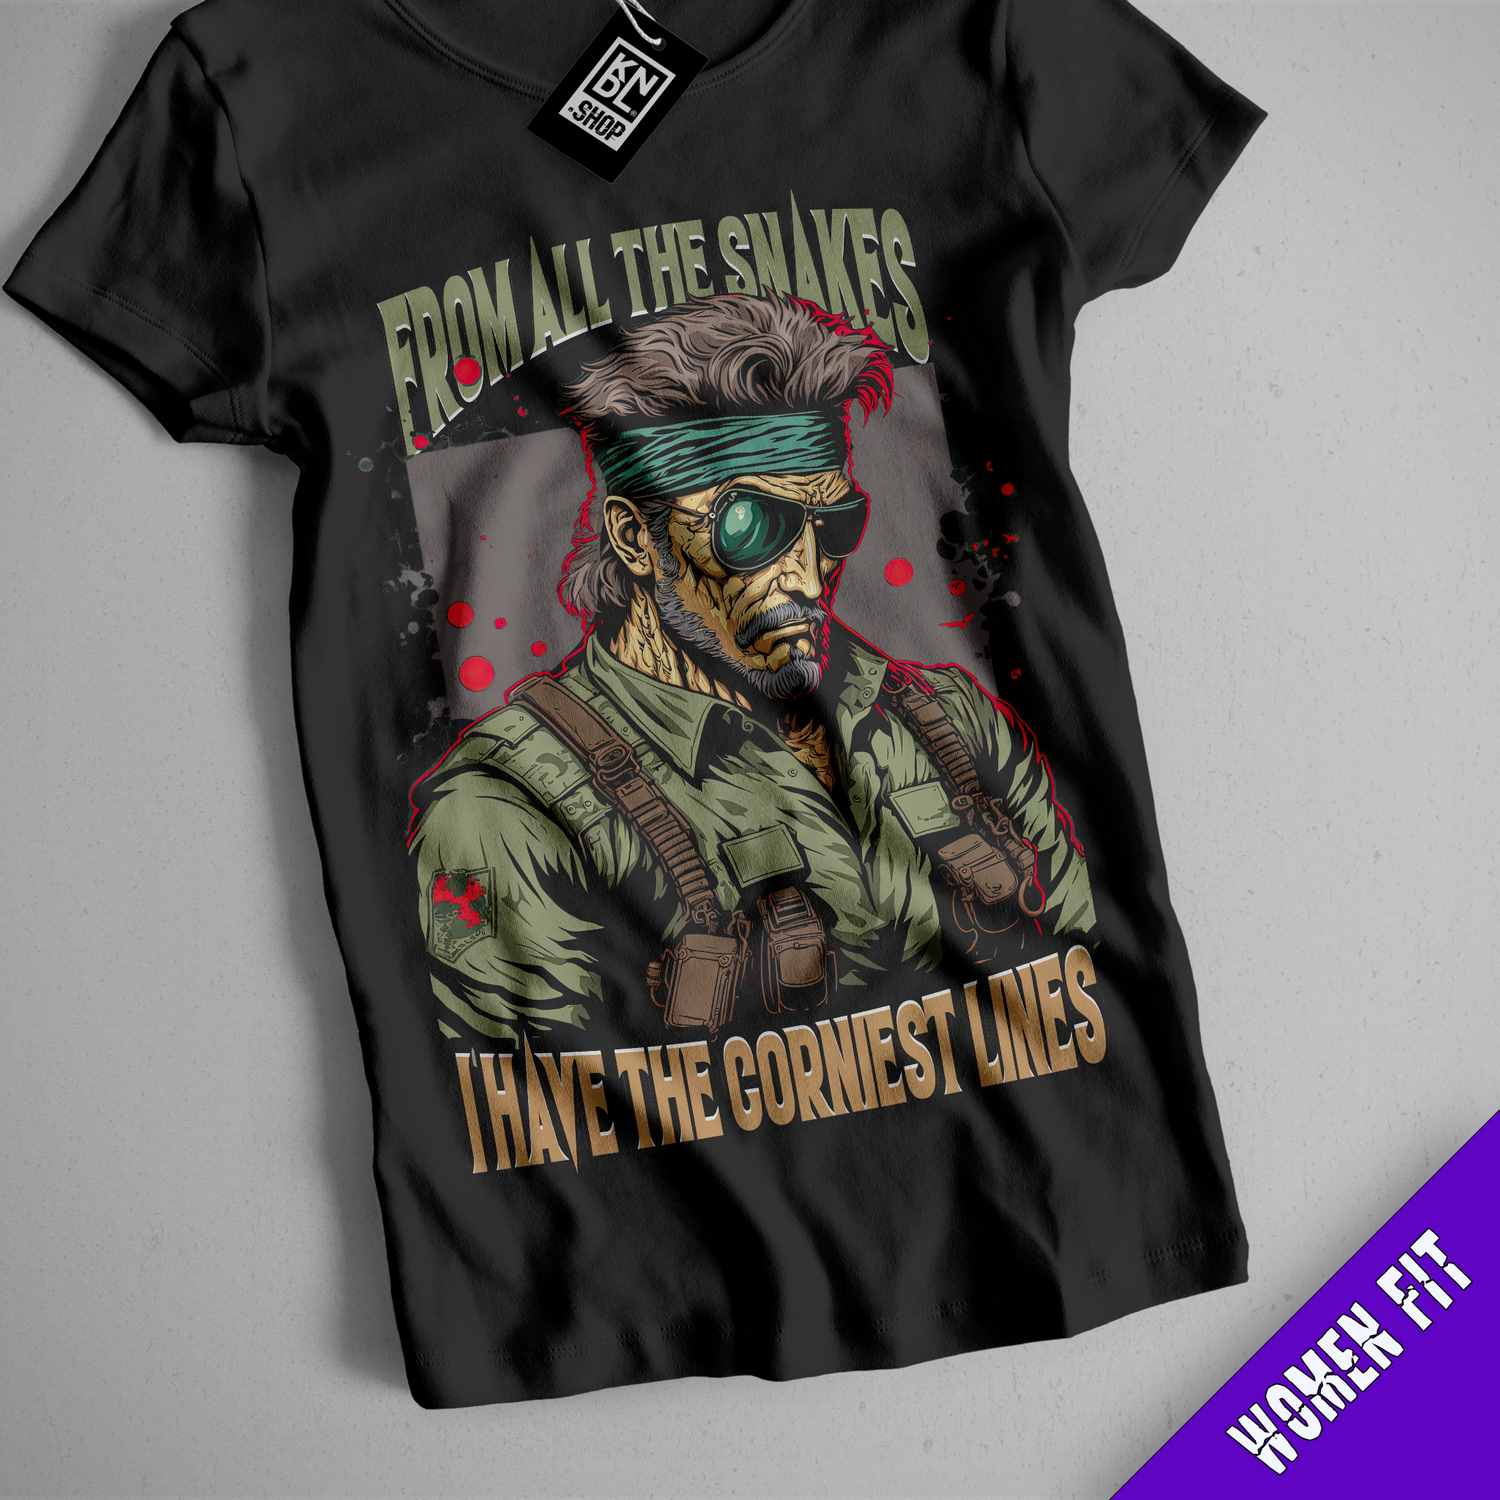 a black shirt with an image of a soldier wearing goggles